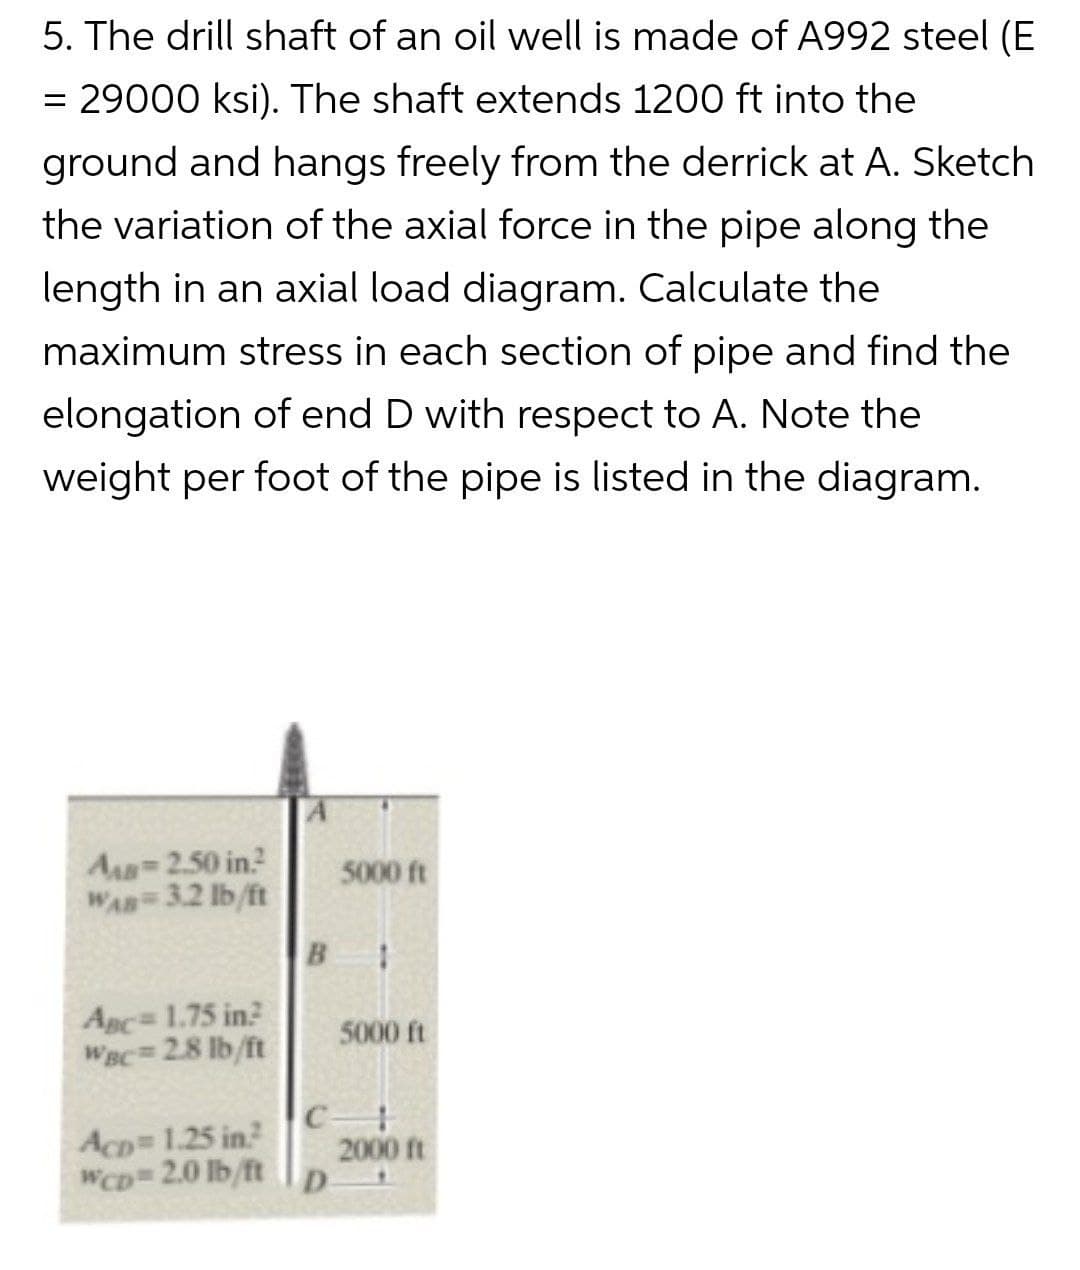 5. The drill shaft of an oil well is made of A992 steel (E
= 29000 ksi). The shaft extends 1200 ft into the
ground and hangs freely from the derrick at A. Sketch
the variation of the axial force in the pipe along the
length in an axial load diagram. Calculate the
maximum stress in each section of pipe and find the
elongation of end D with respect to A. Note the
weight per foot of the pipe is listed in the diagram.
AB=2.50 in.²
WAB=3.2 lb/ft
ABC= 1.75 in2
WBC= 2.8 lb/ft
Acp= 1.25 in?
WCD=2.0 lb/ft
B 1
C
5000 ft
D
5000 ft
2000 ft